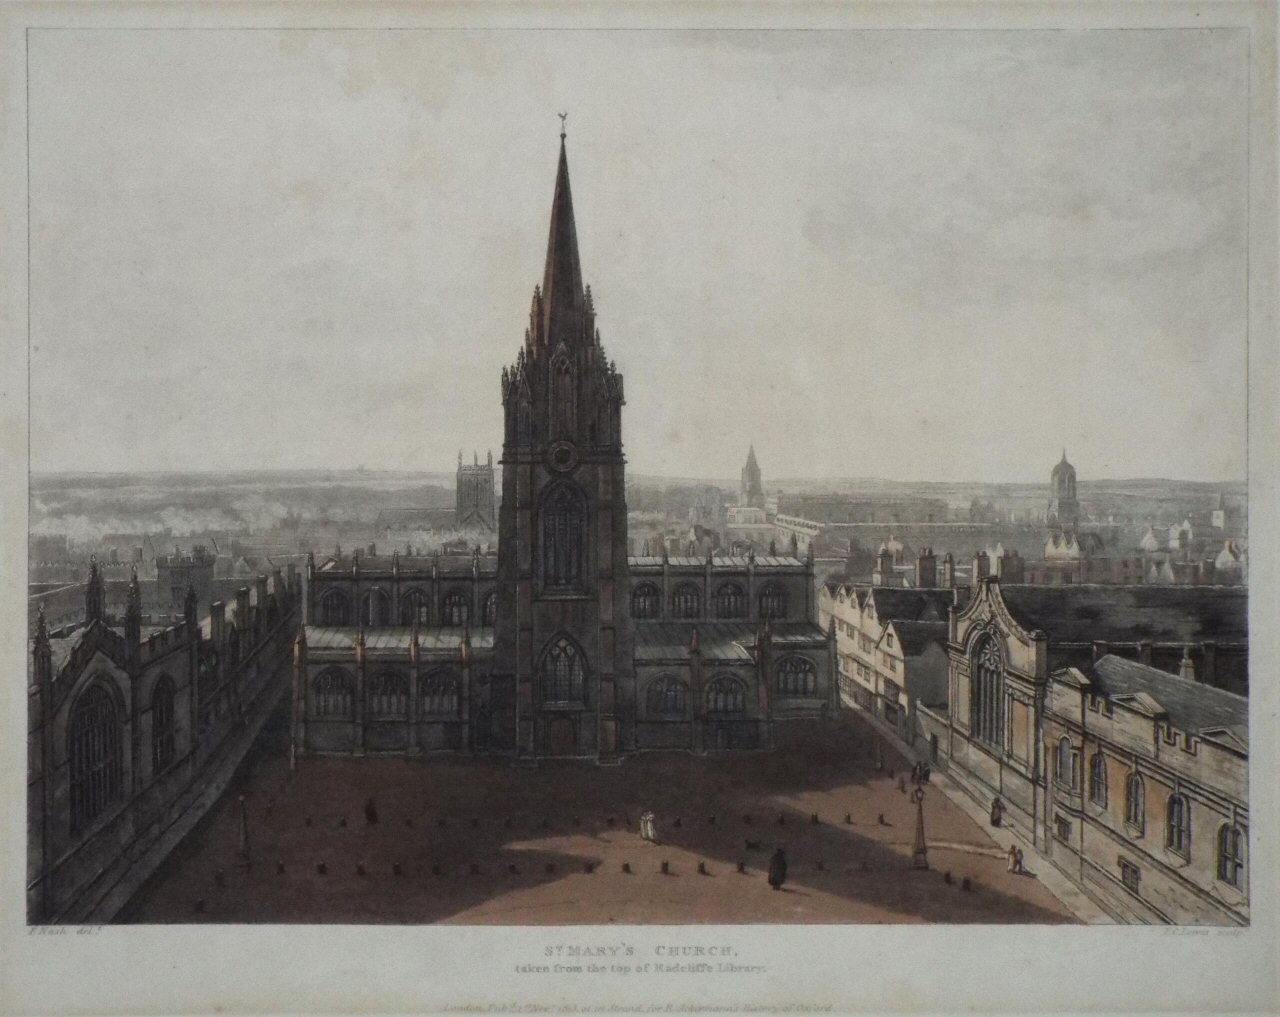 Aquatint - St. Mary's Church, taken from the top of Radcliffe Library. - Lewis